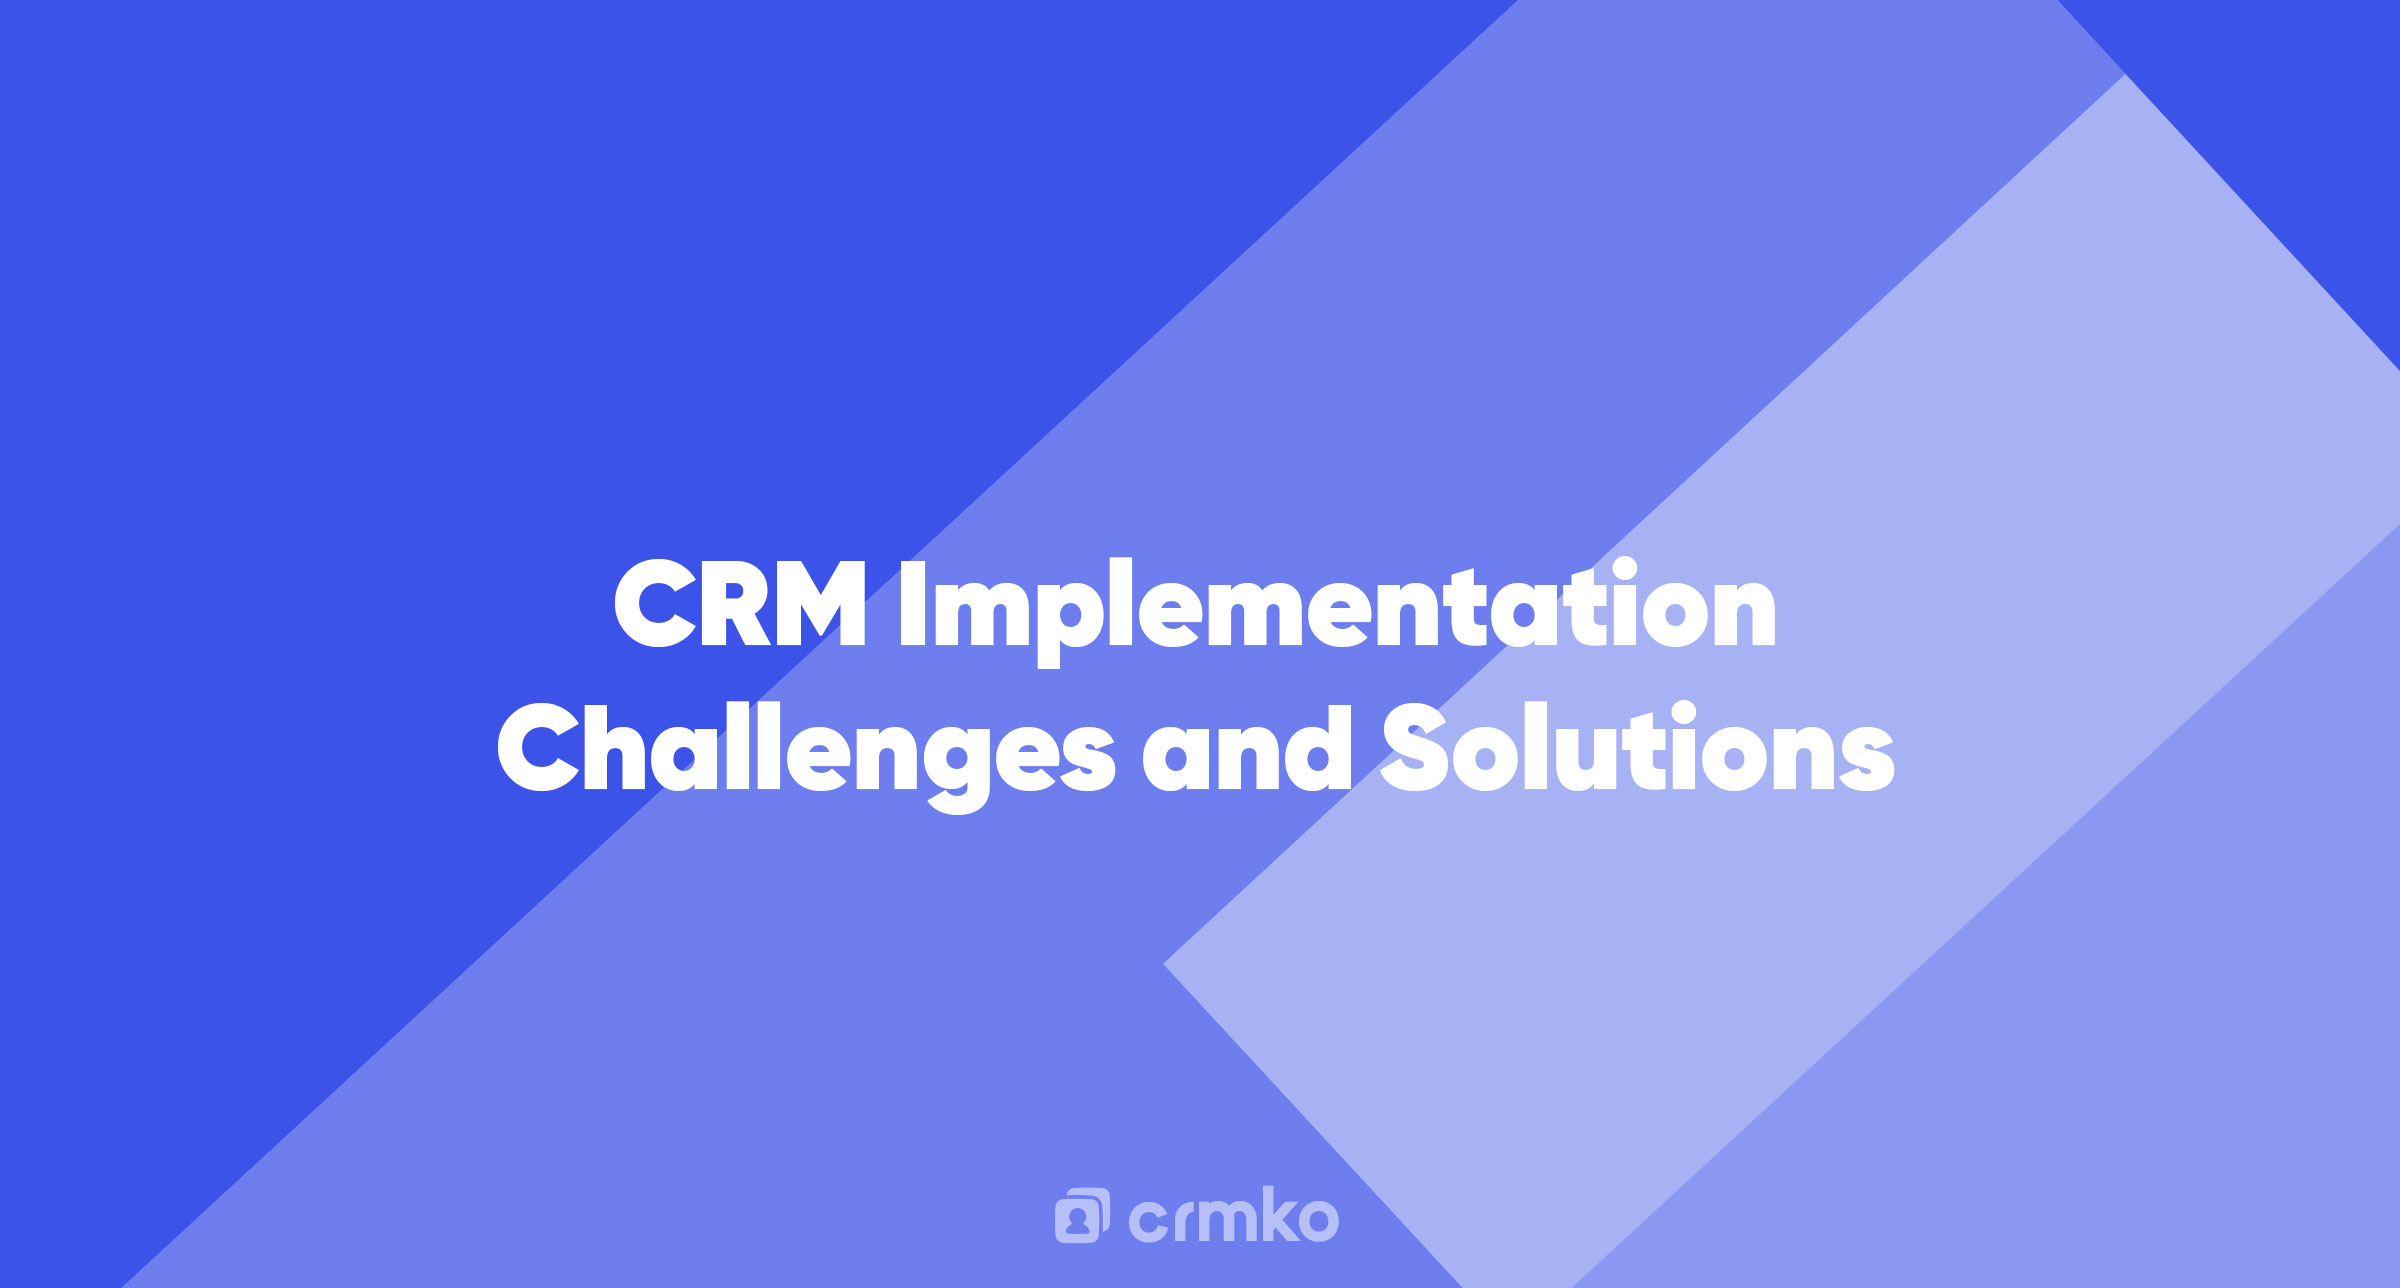 Article | CRM Implementation Challenges and Solutions